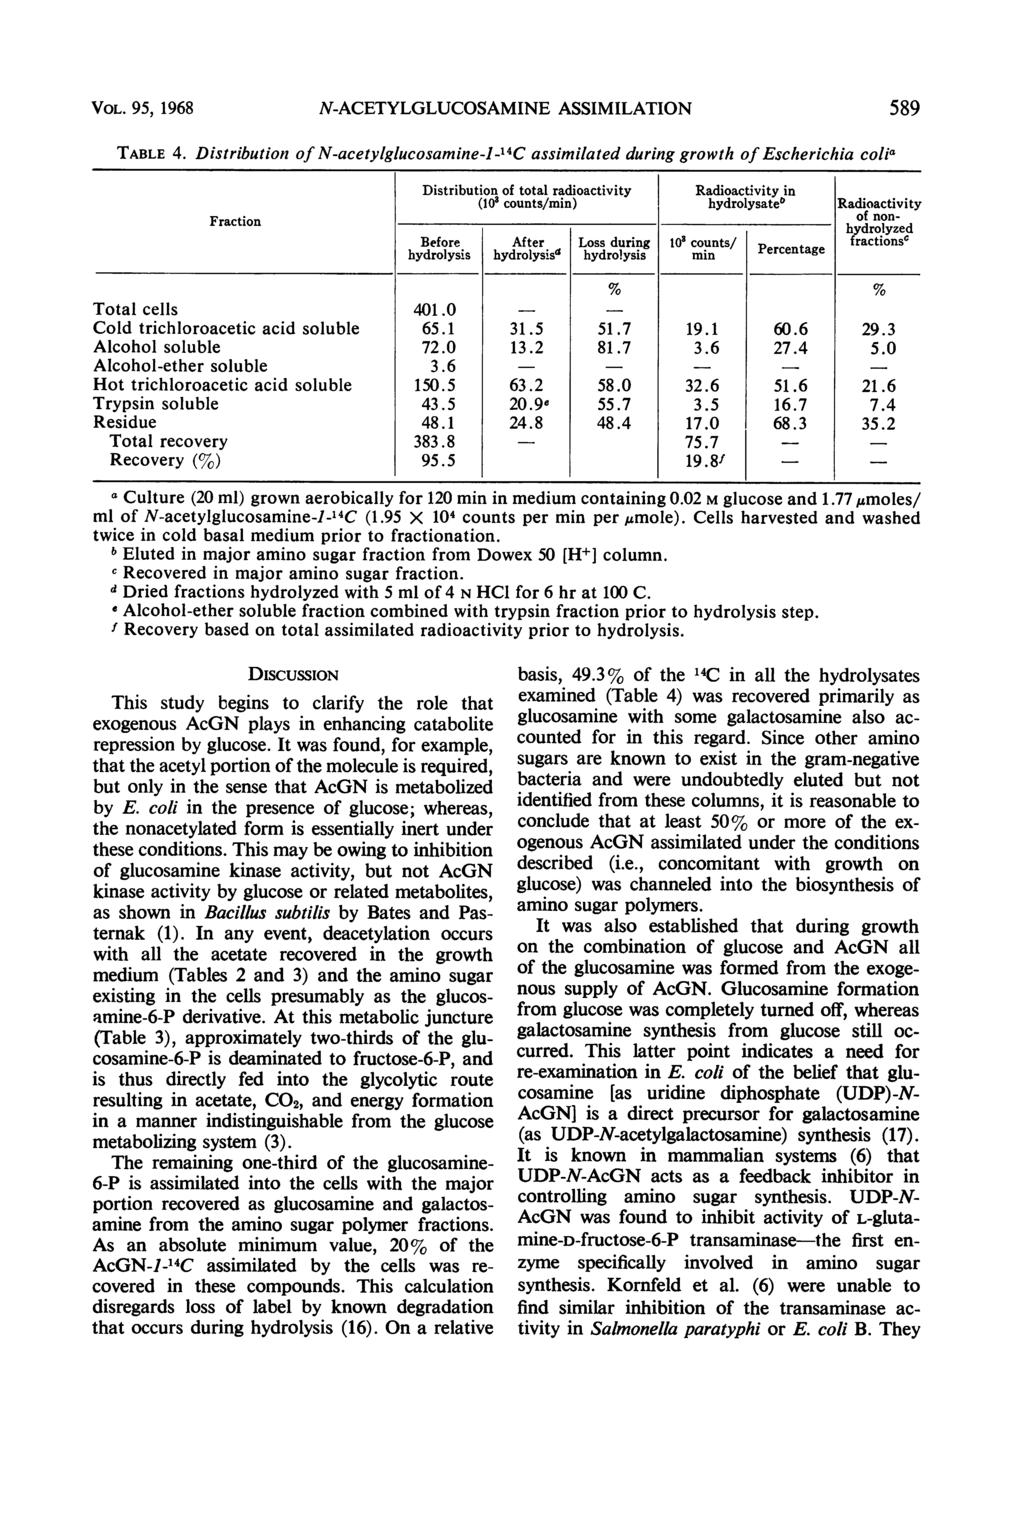 VOL. 95, 1968 N-ACETYLGLUCOSAMINE ASSIMILATION 589 TABLE 4.